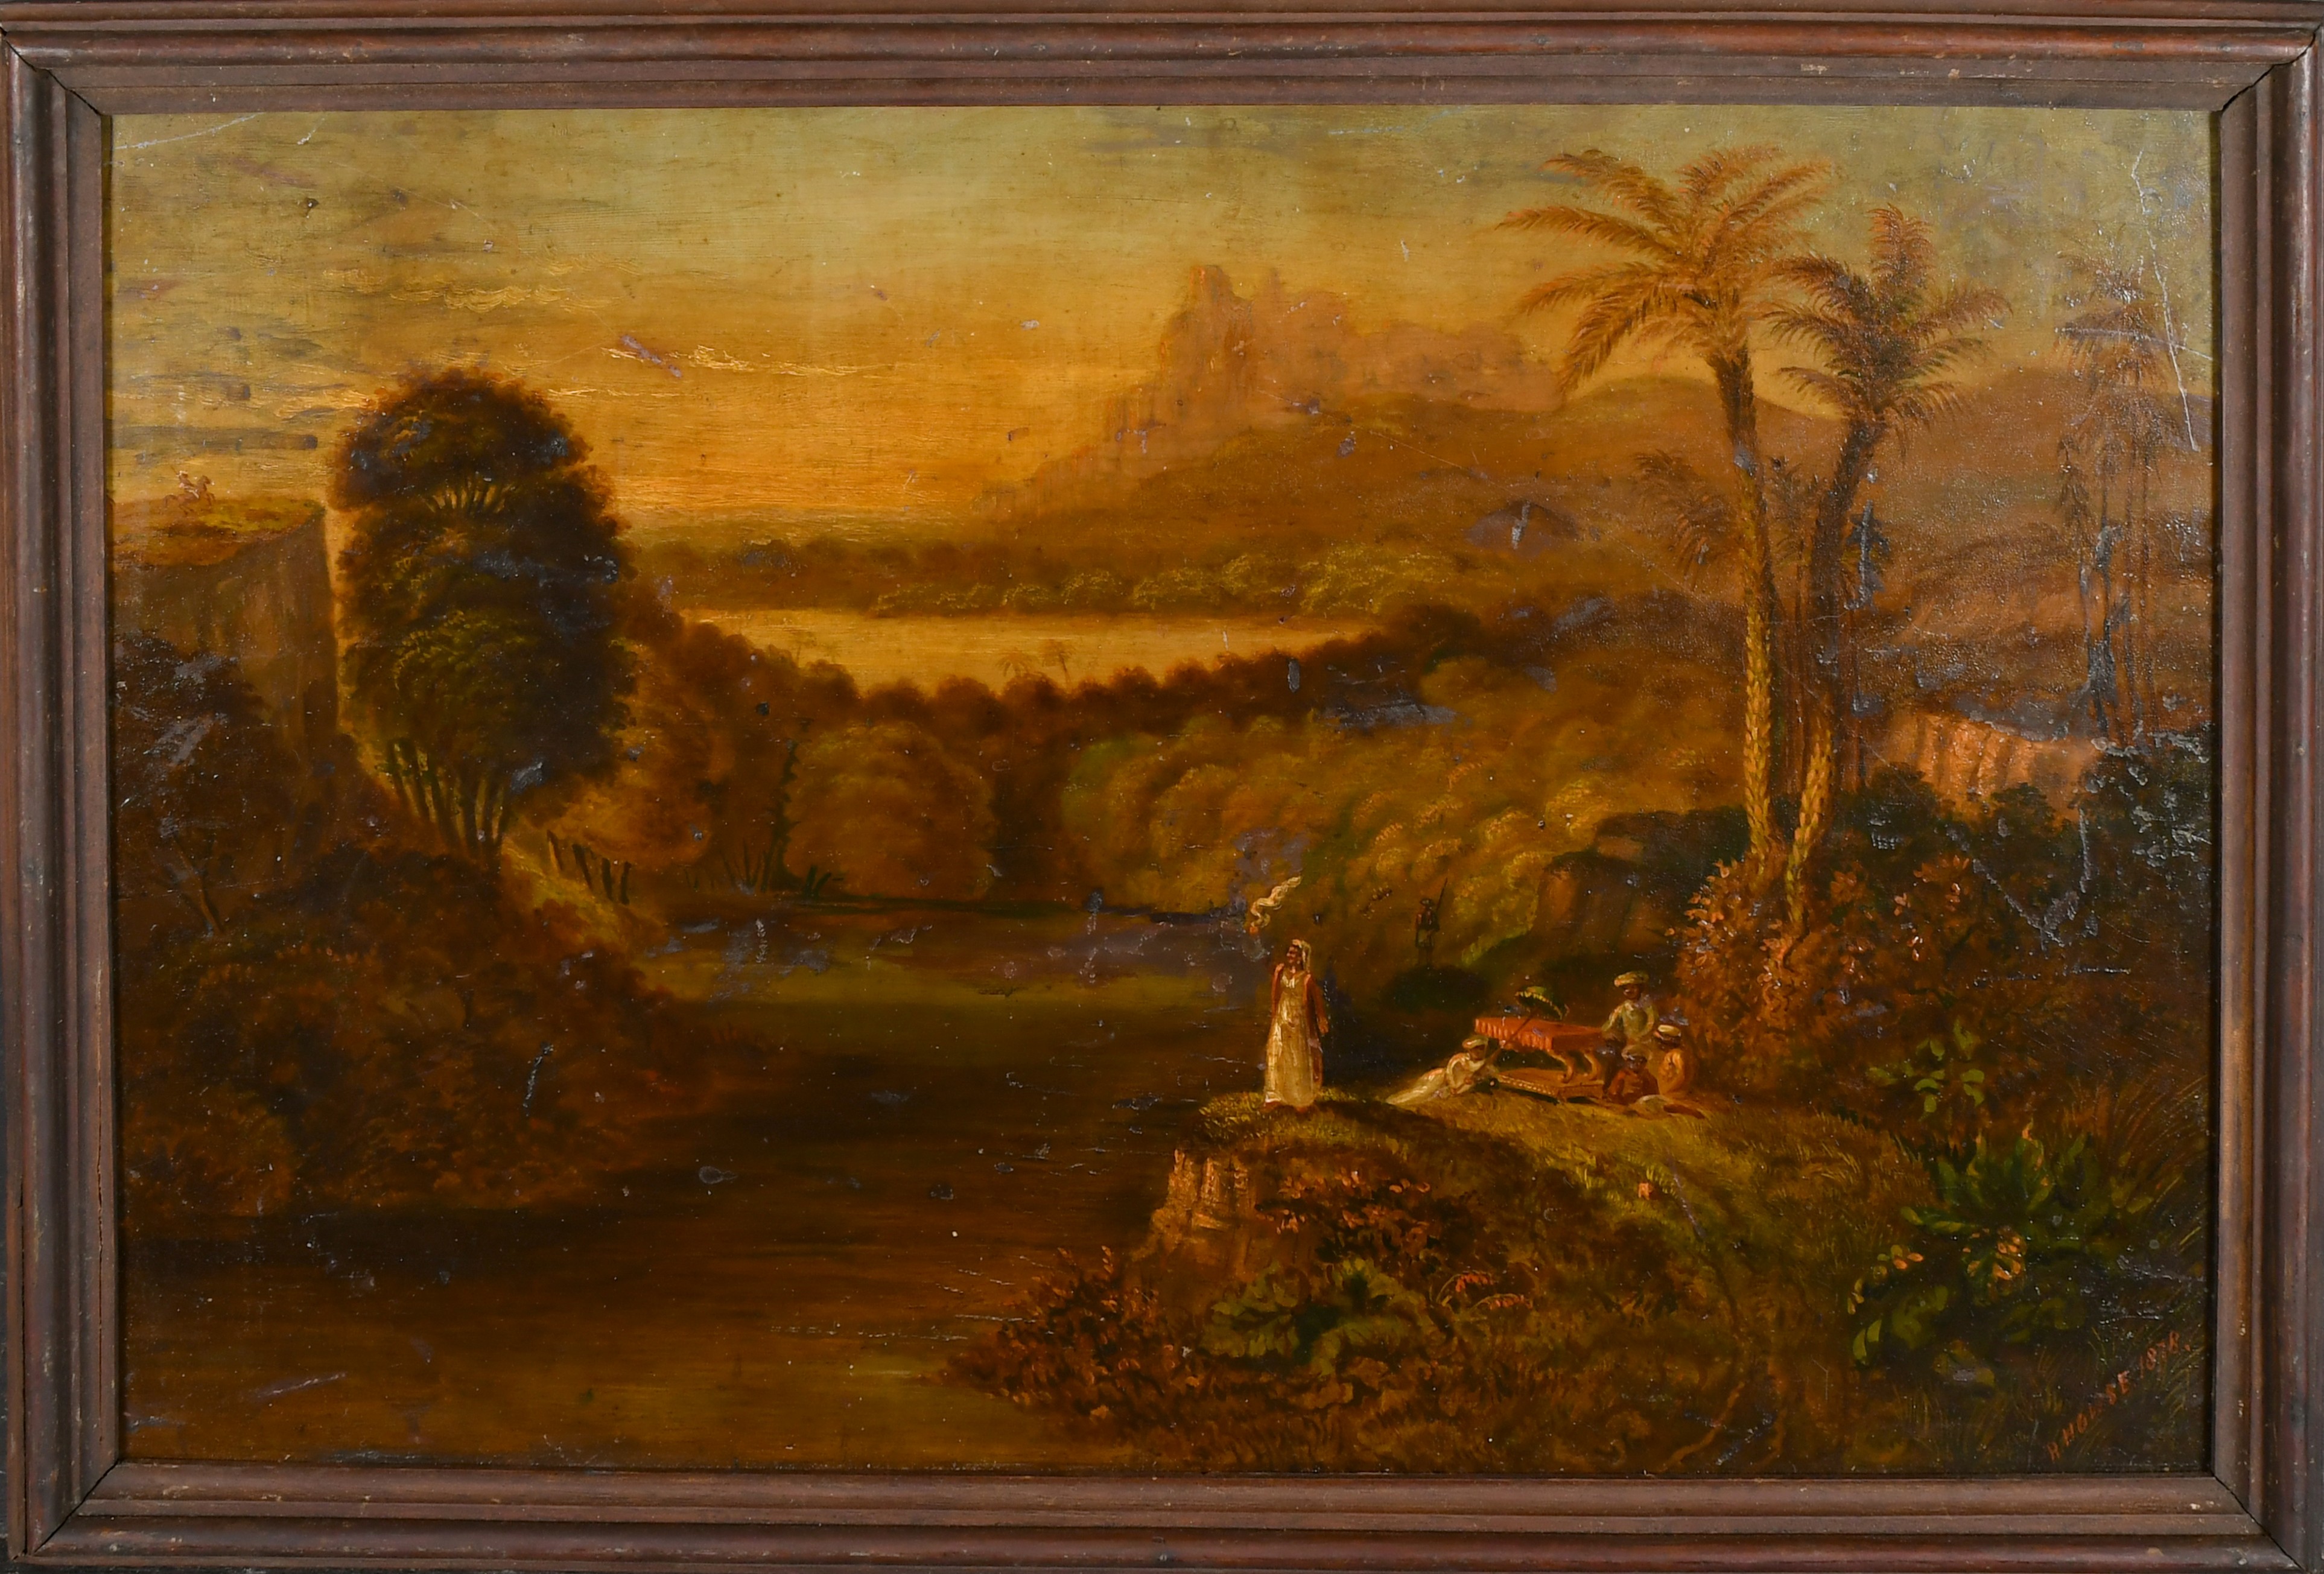 R Howse (19th Century) British. A Woman Signalling in an Indian Landscape, Oil on panel, Signed and - Image 2 of 4